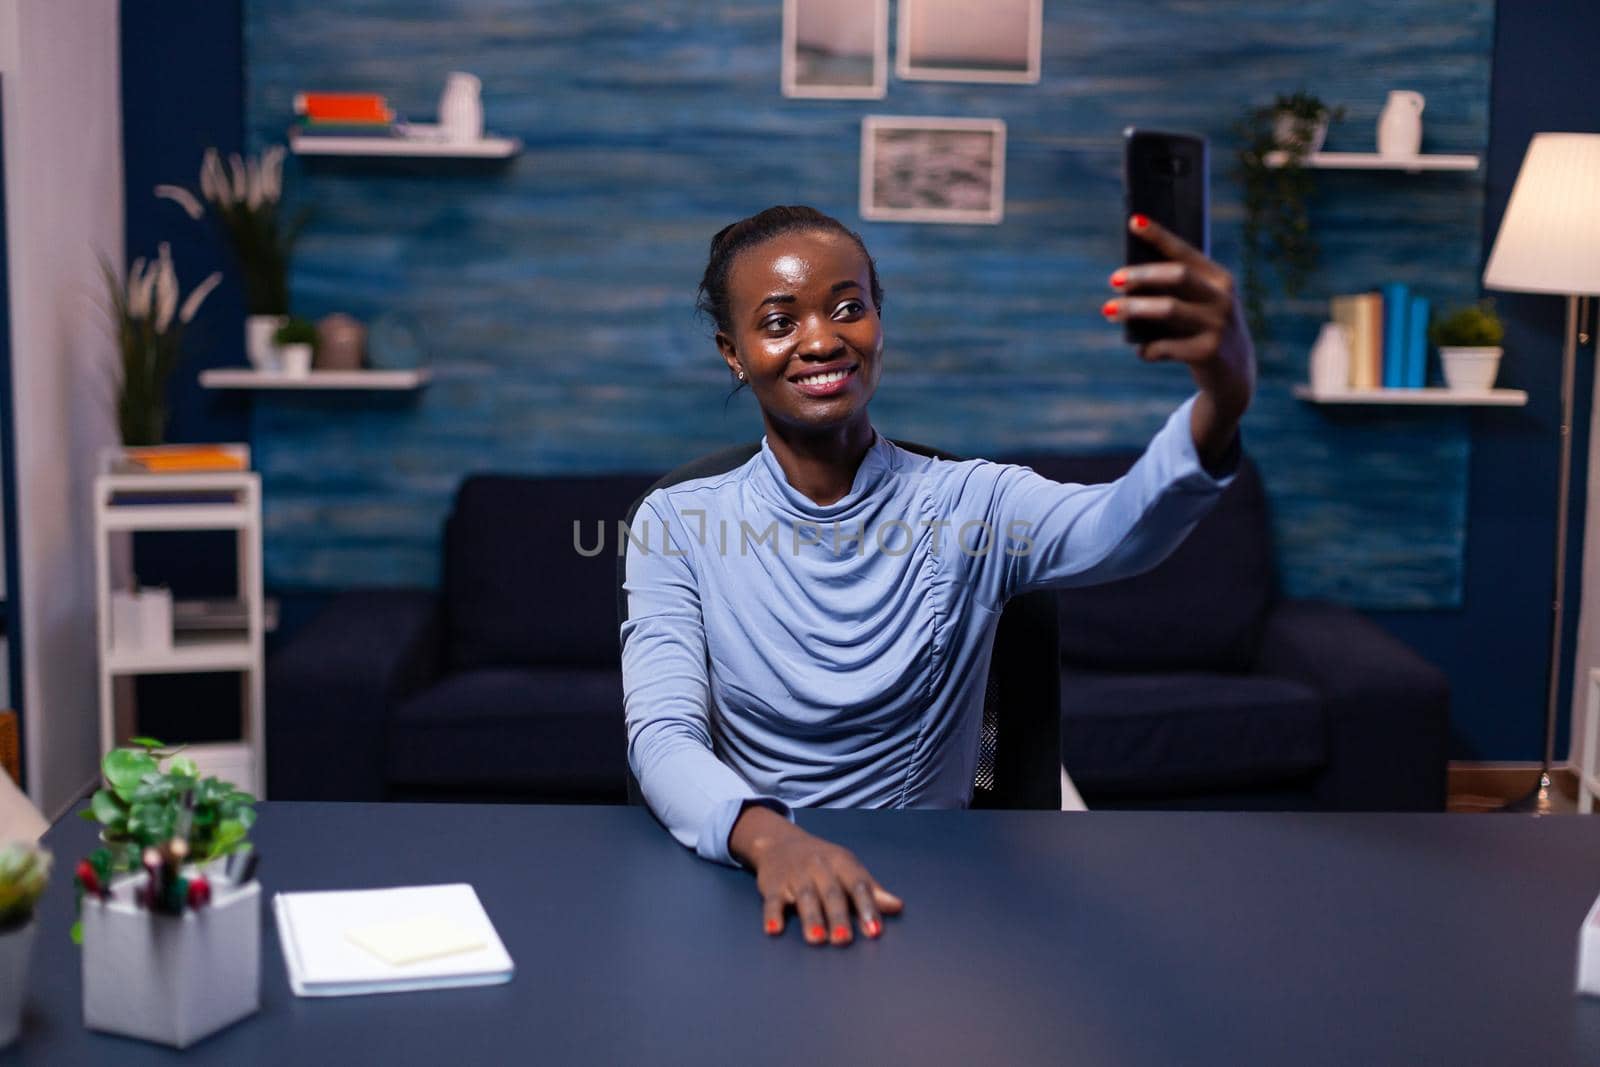 Happy african looking at smartphone taking selfie looking at front camera. Busy focused freelancer using modern technology network wireless doing overtime.